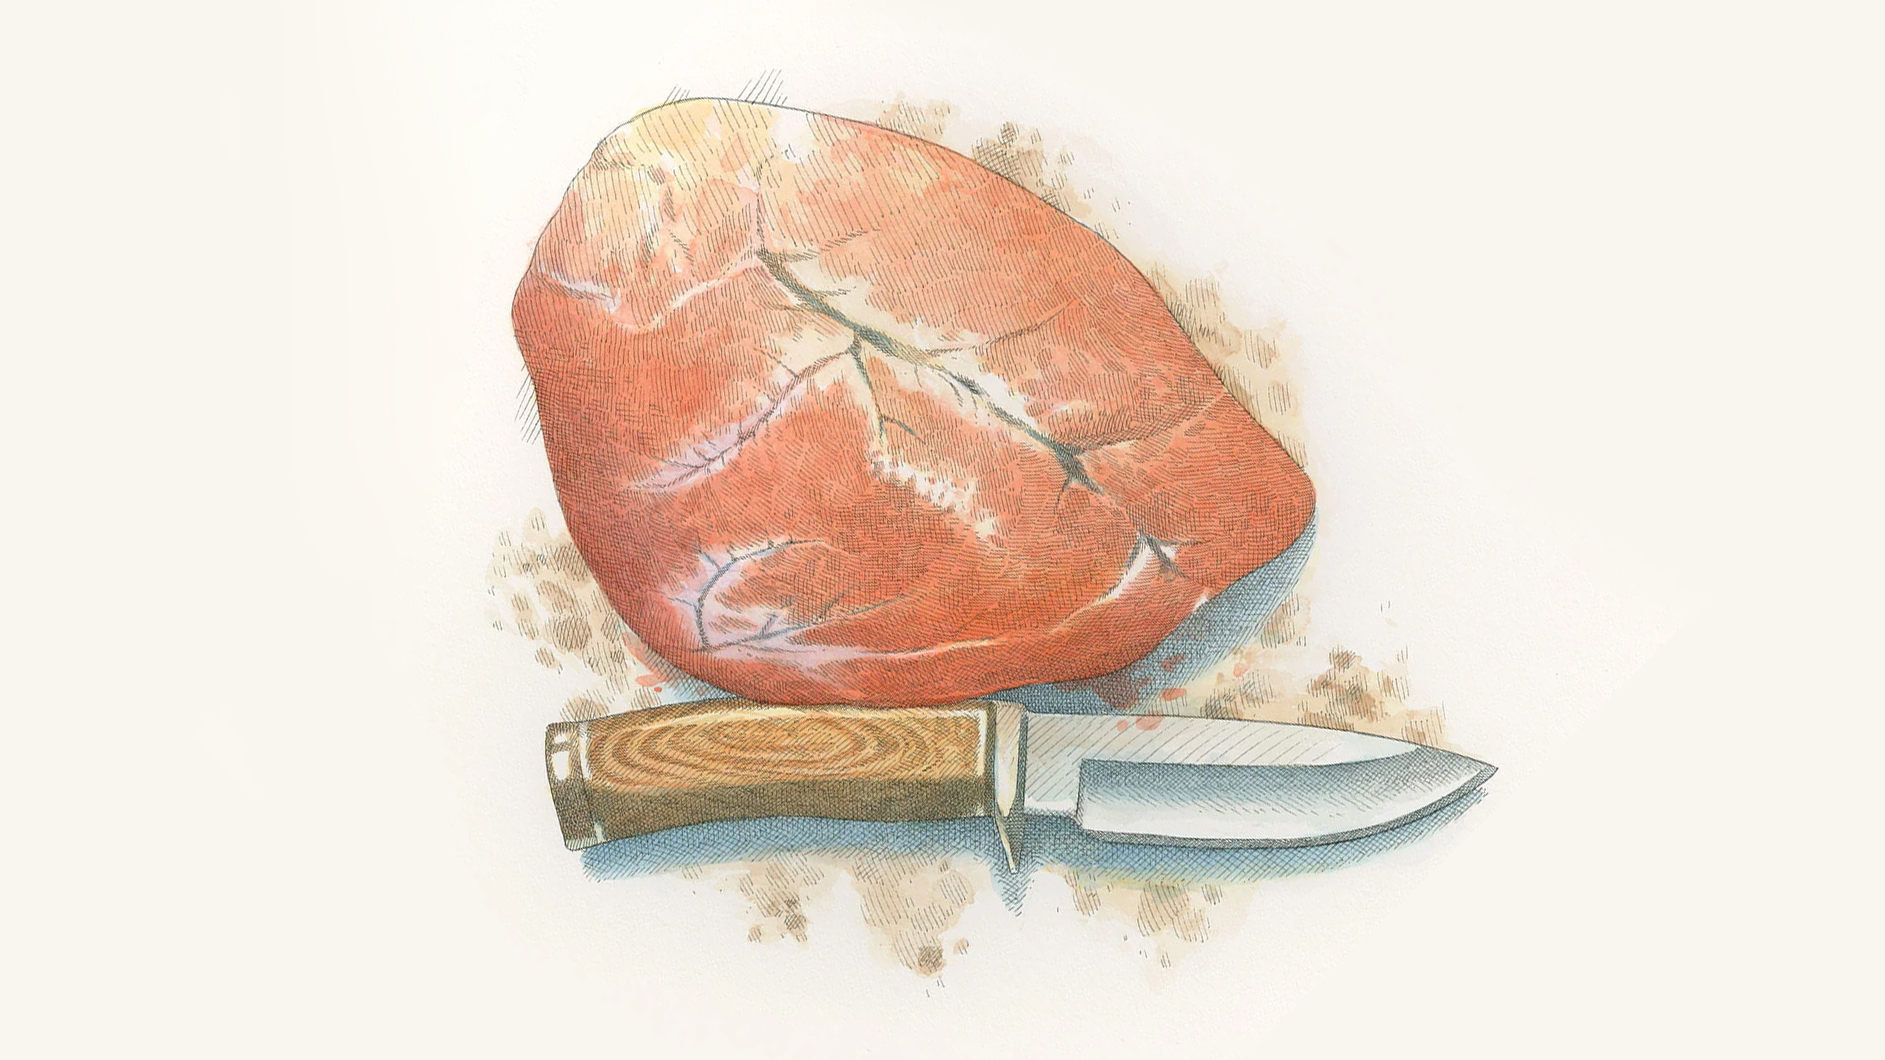 An illustration of a deer heart and a fixed blade knife.